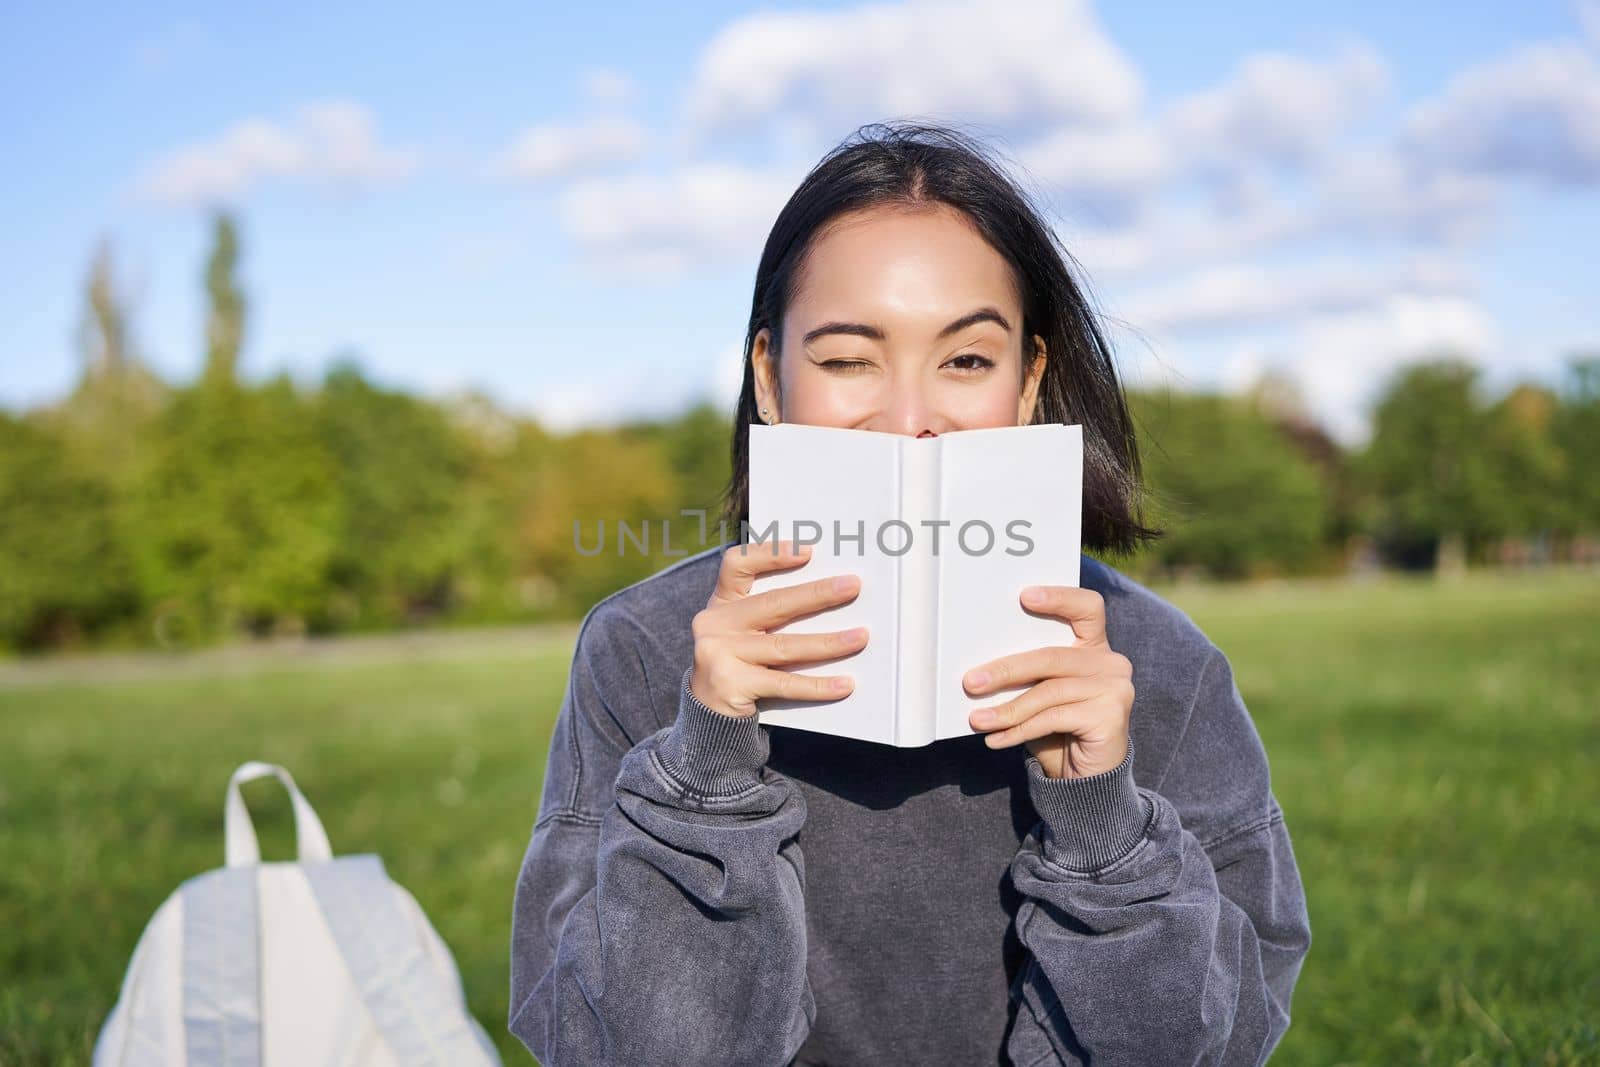 Beautiful asian girl sitting in park on grass, reading and smiling. Woman with book enjoying sunny day outdoors.